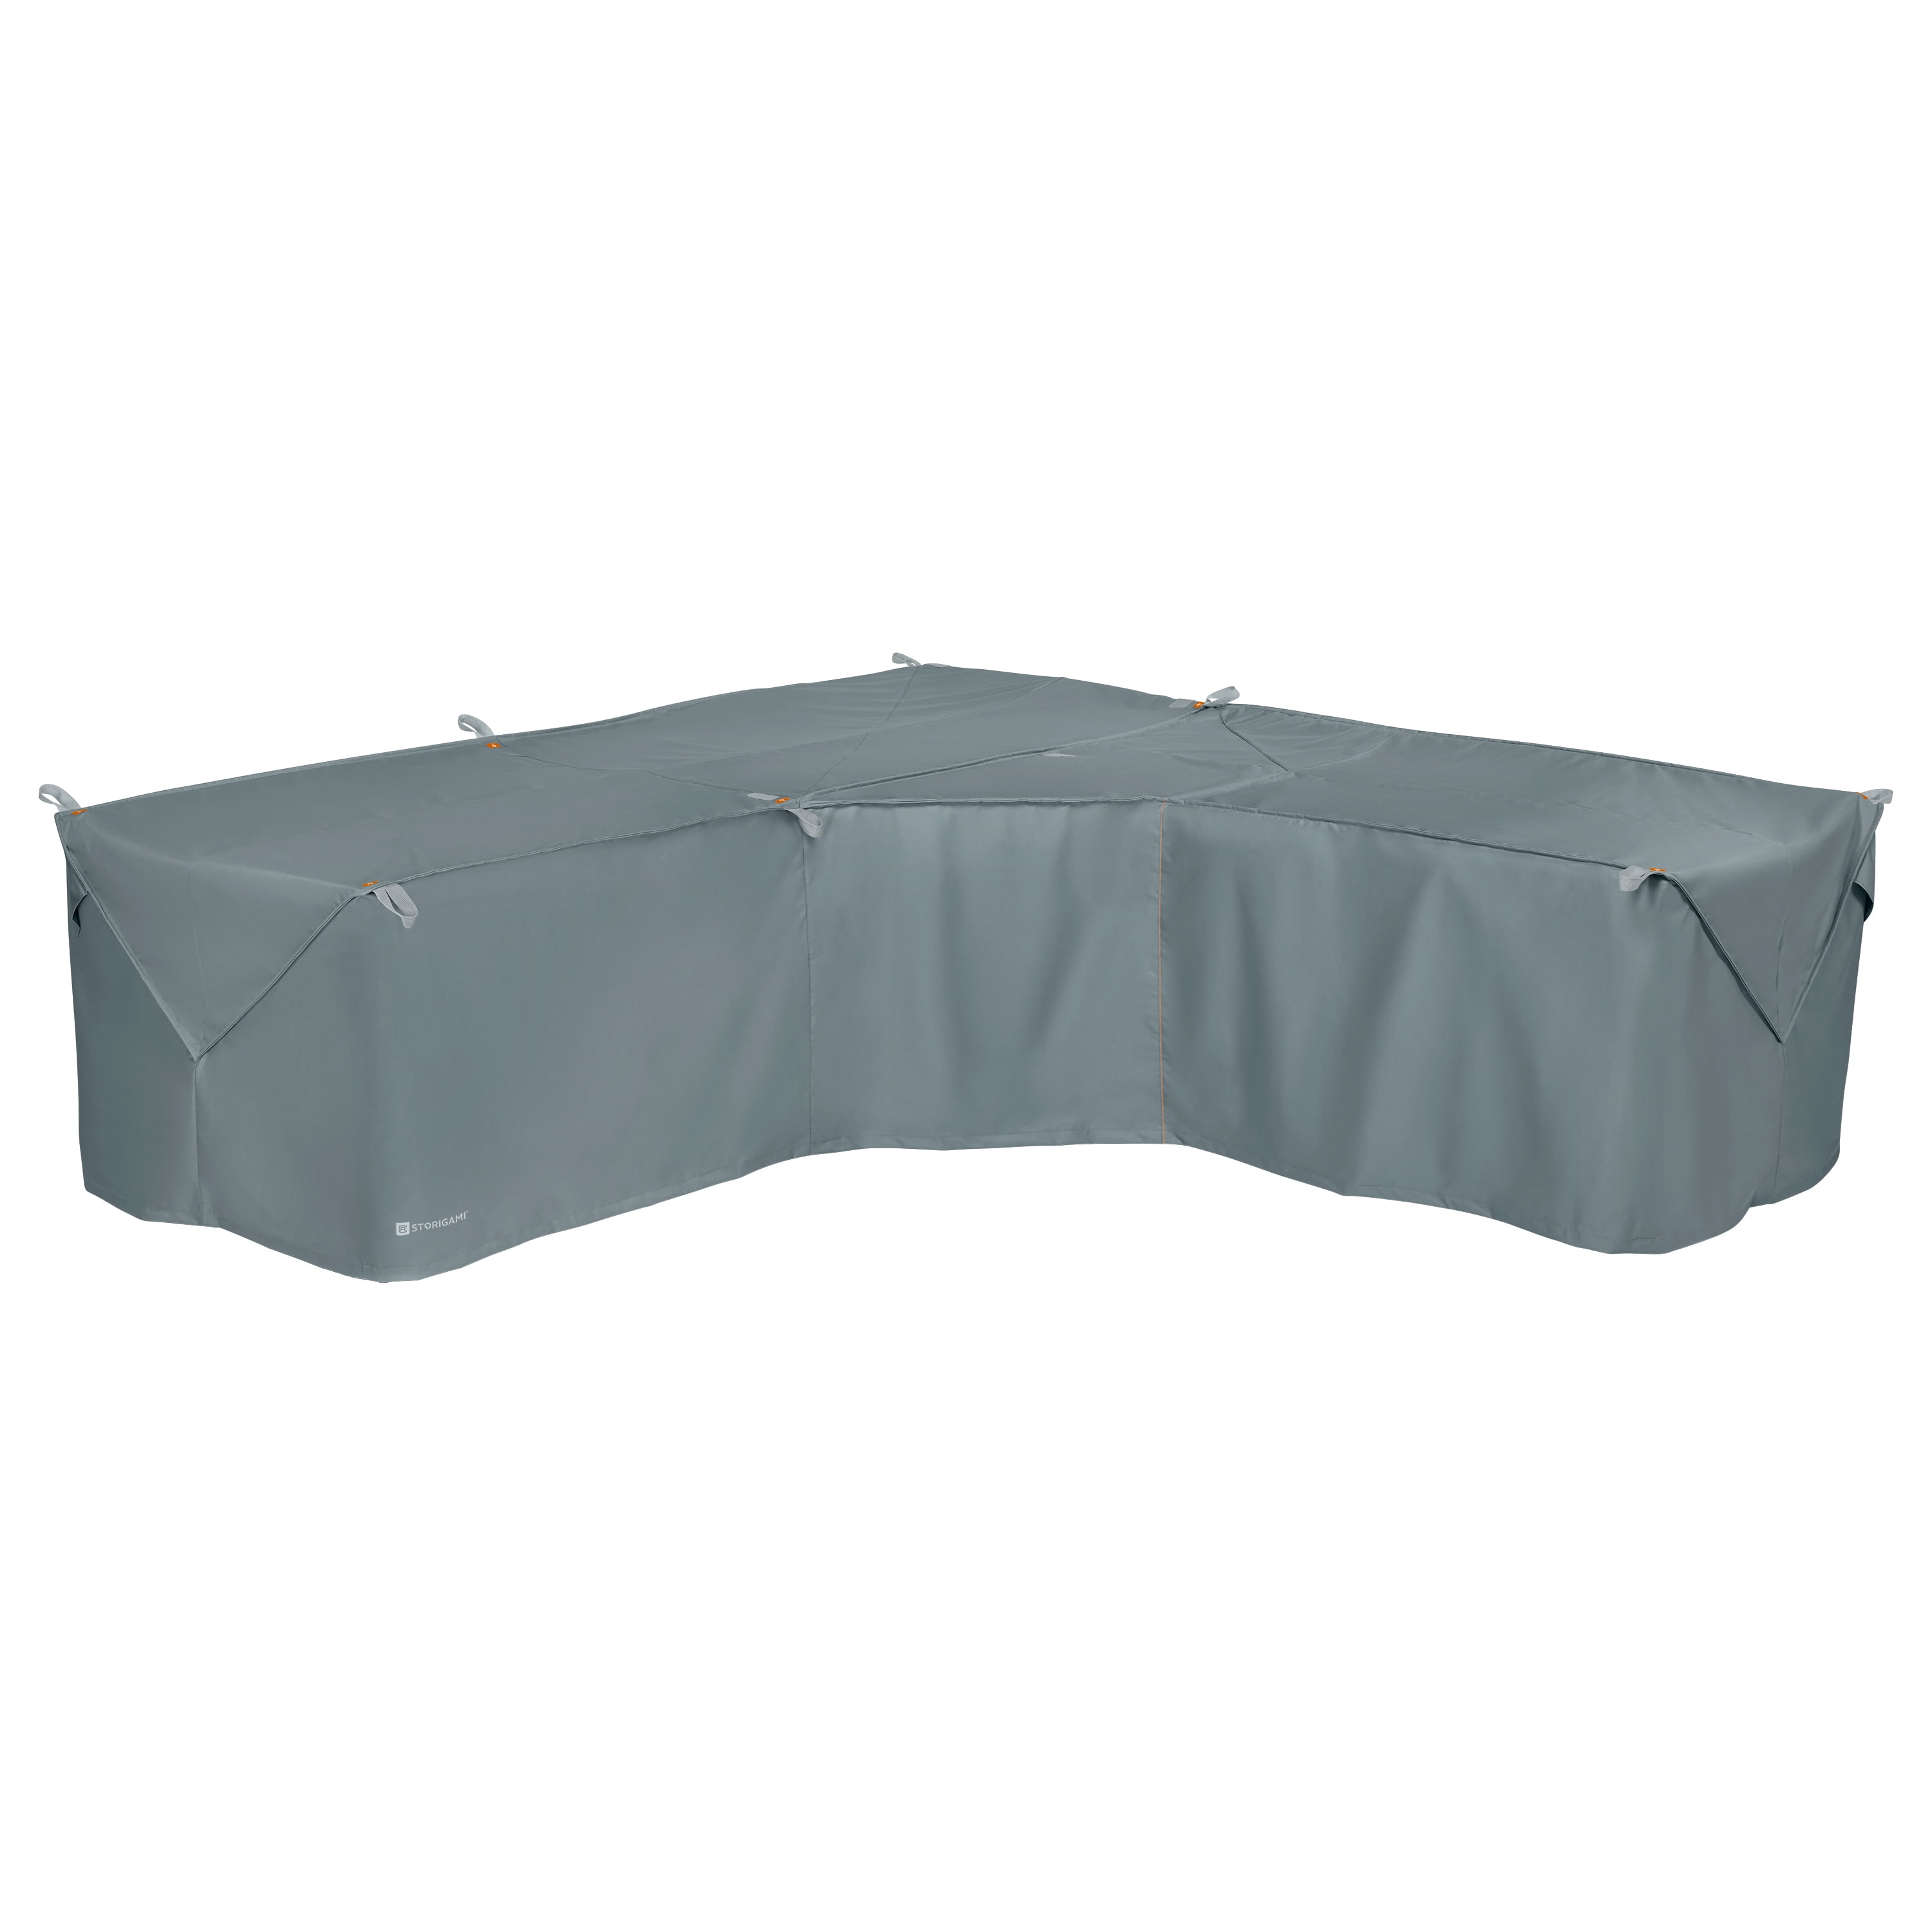 Size : 300x300x98x70cm L-shaped Outdoor Sofa Cover Dustproof And Waterproof Protection Furniture Cleaning 210D Oxford Cloth 300x300x98x70cm Black